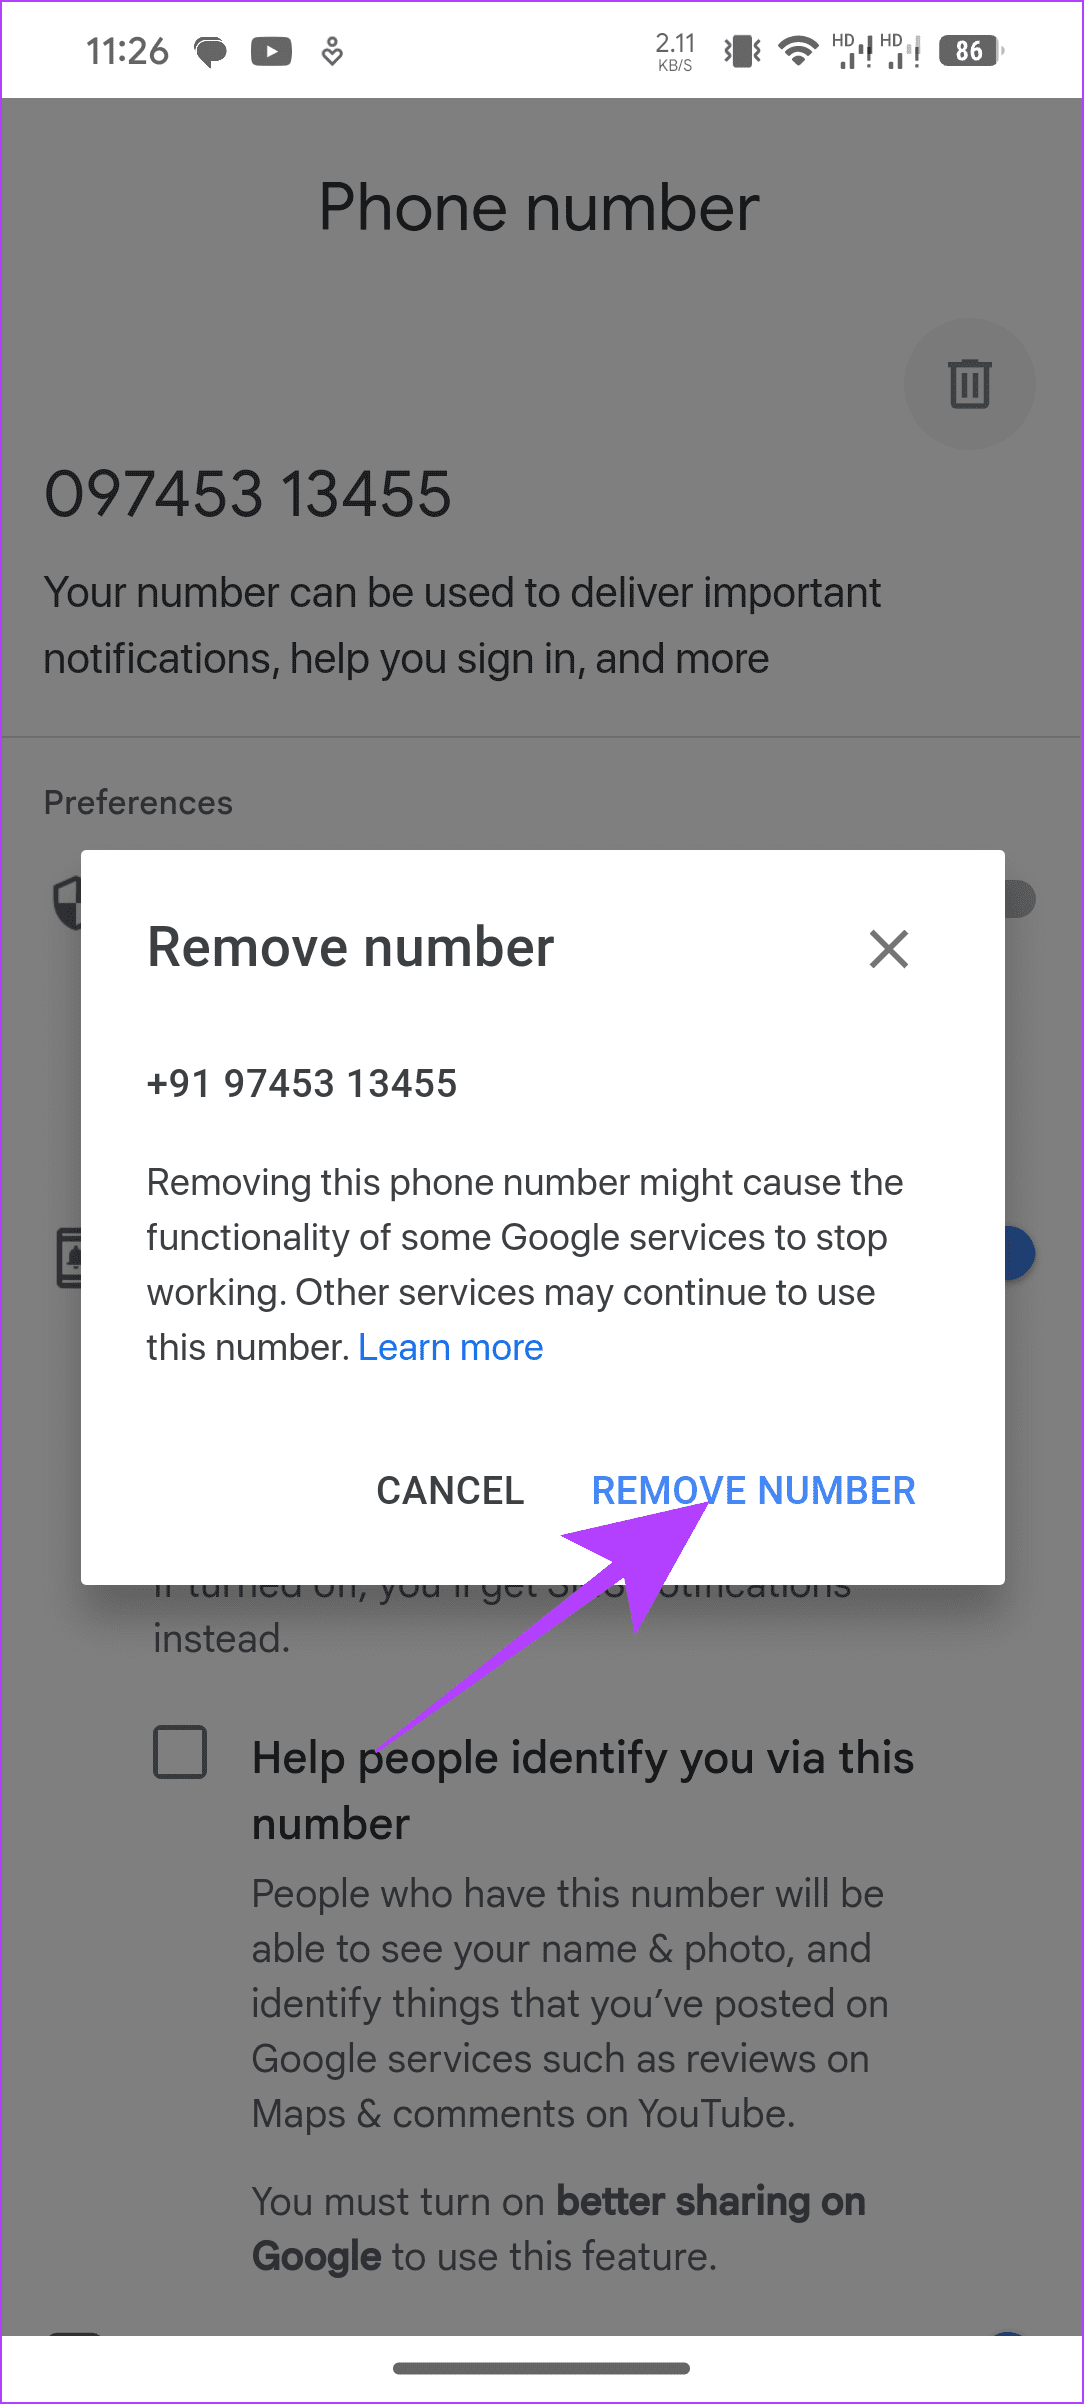 tap remove number